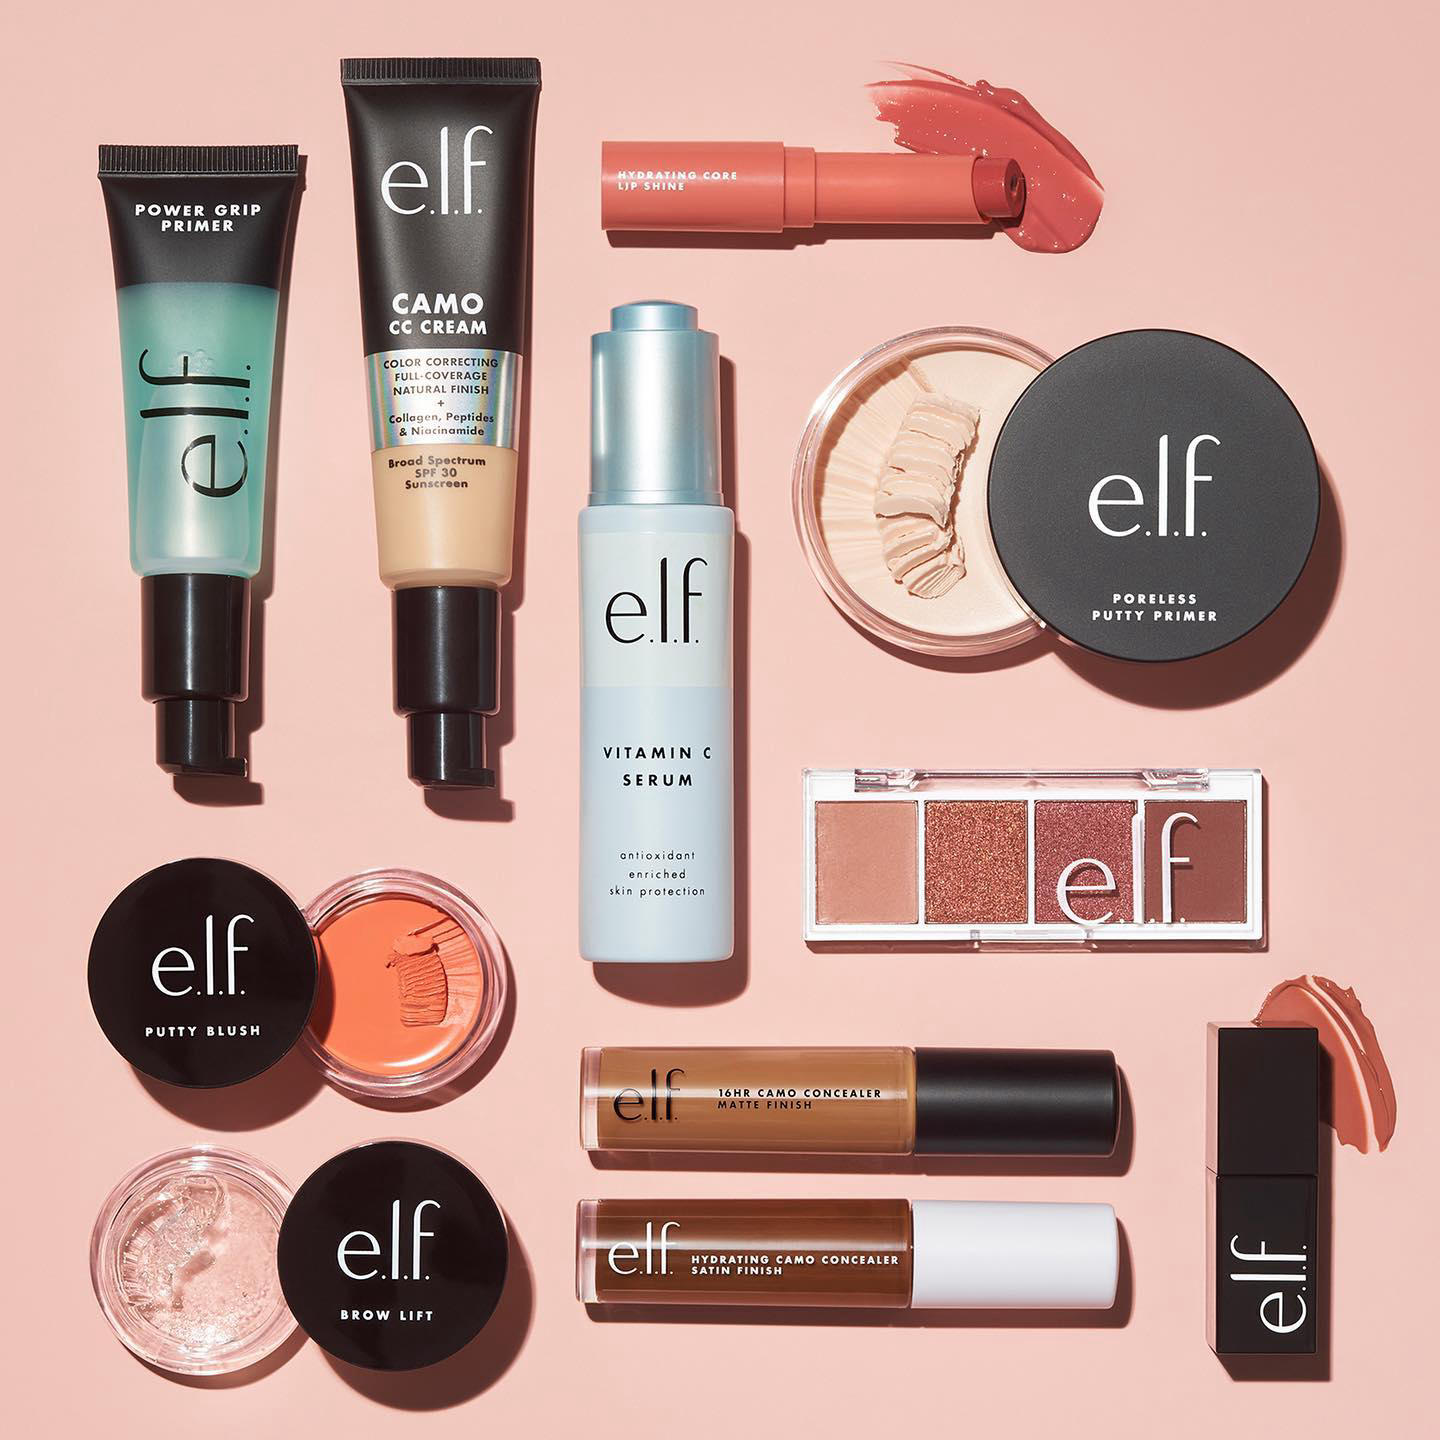 e.l.f. Cosmetics and Skincare - BRB, we've gone viral